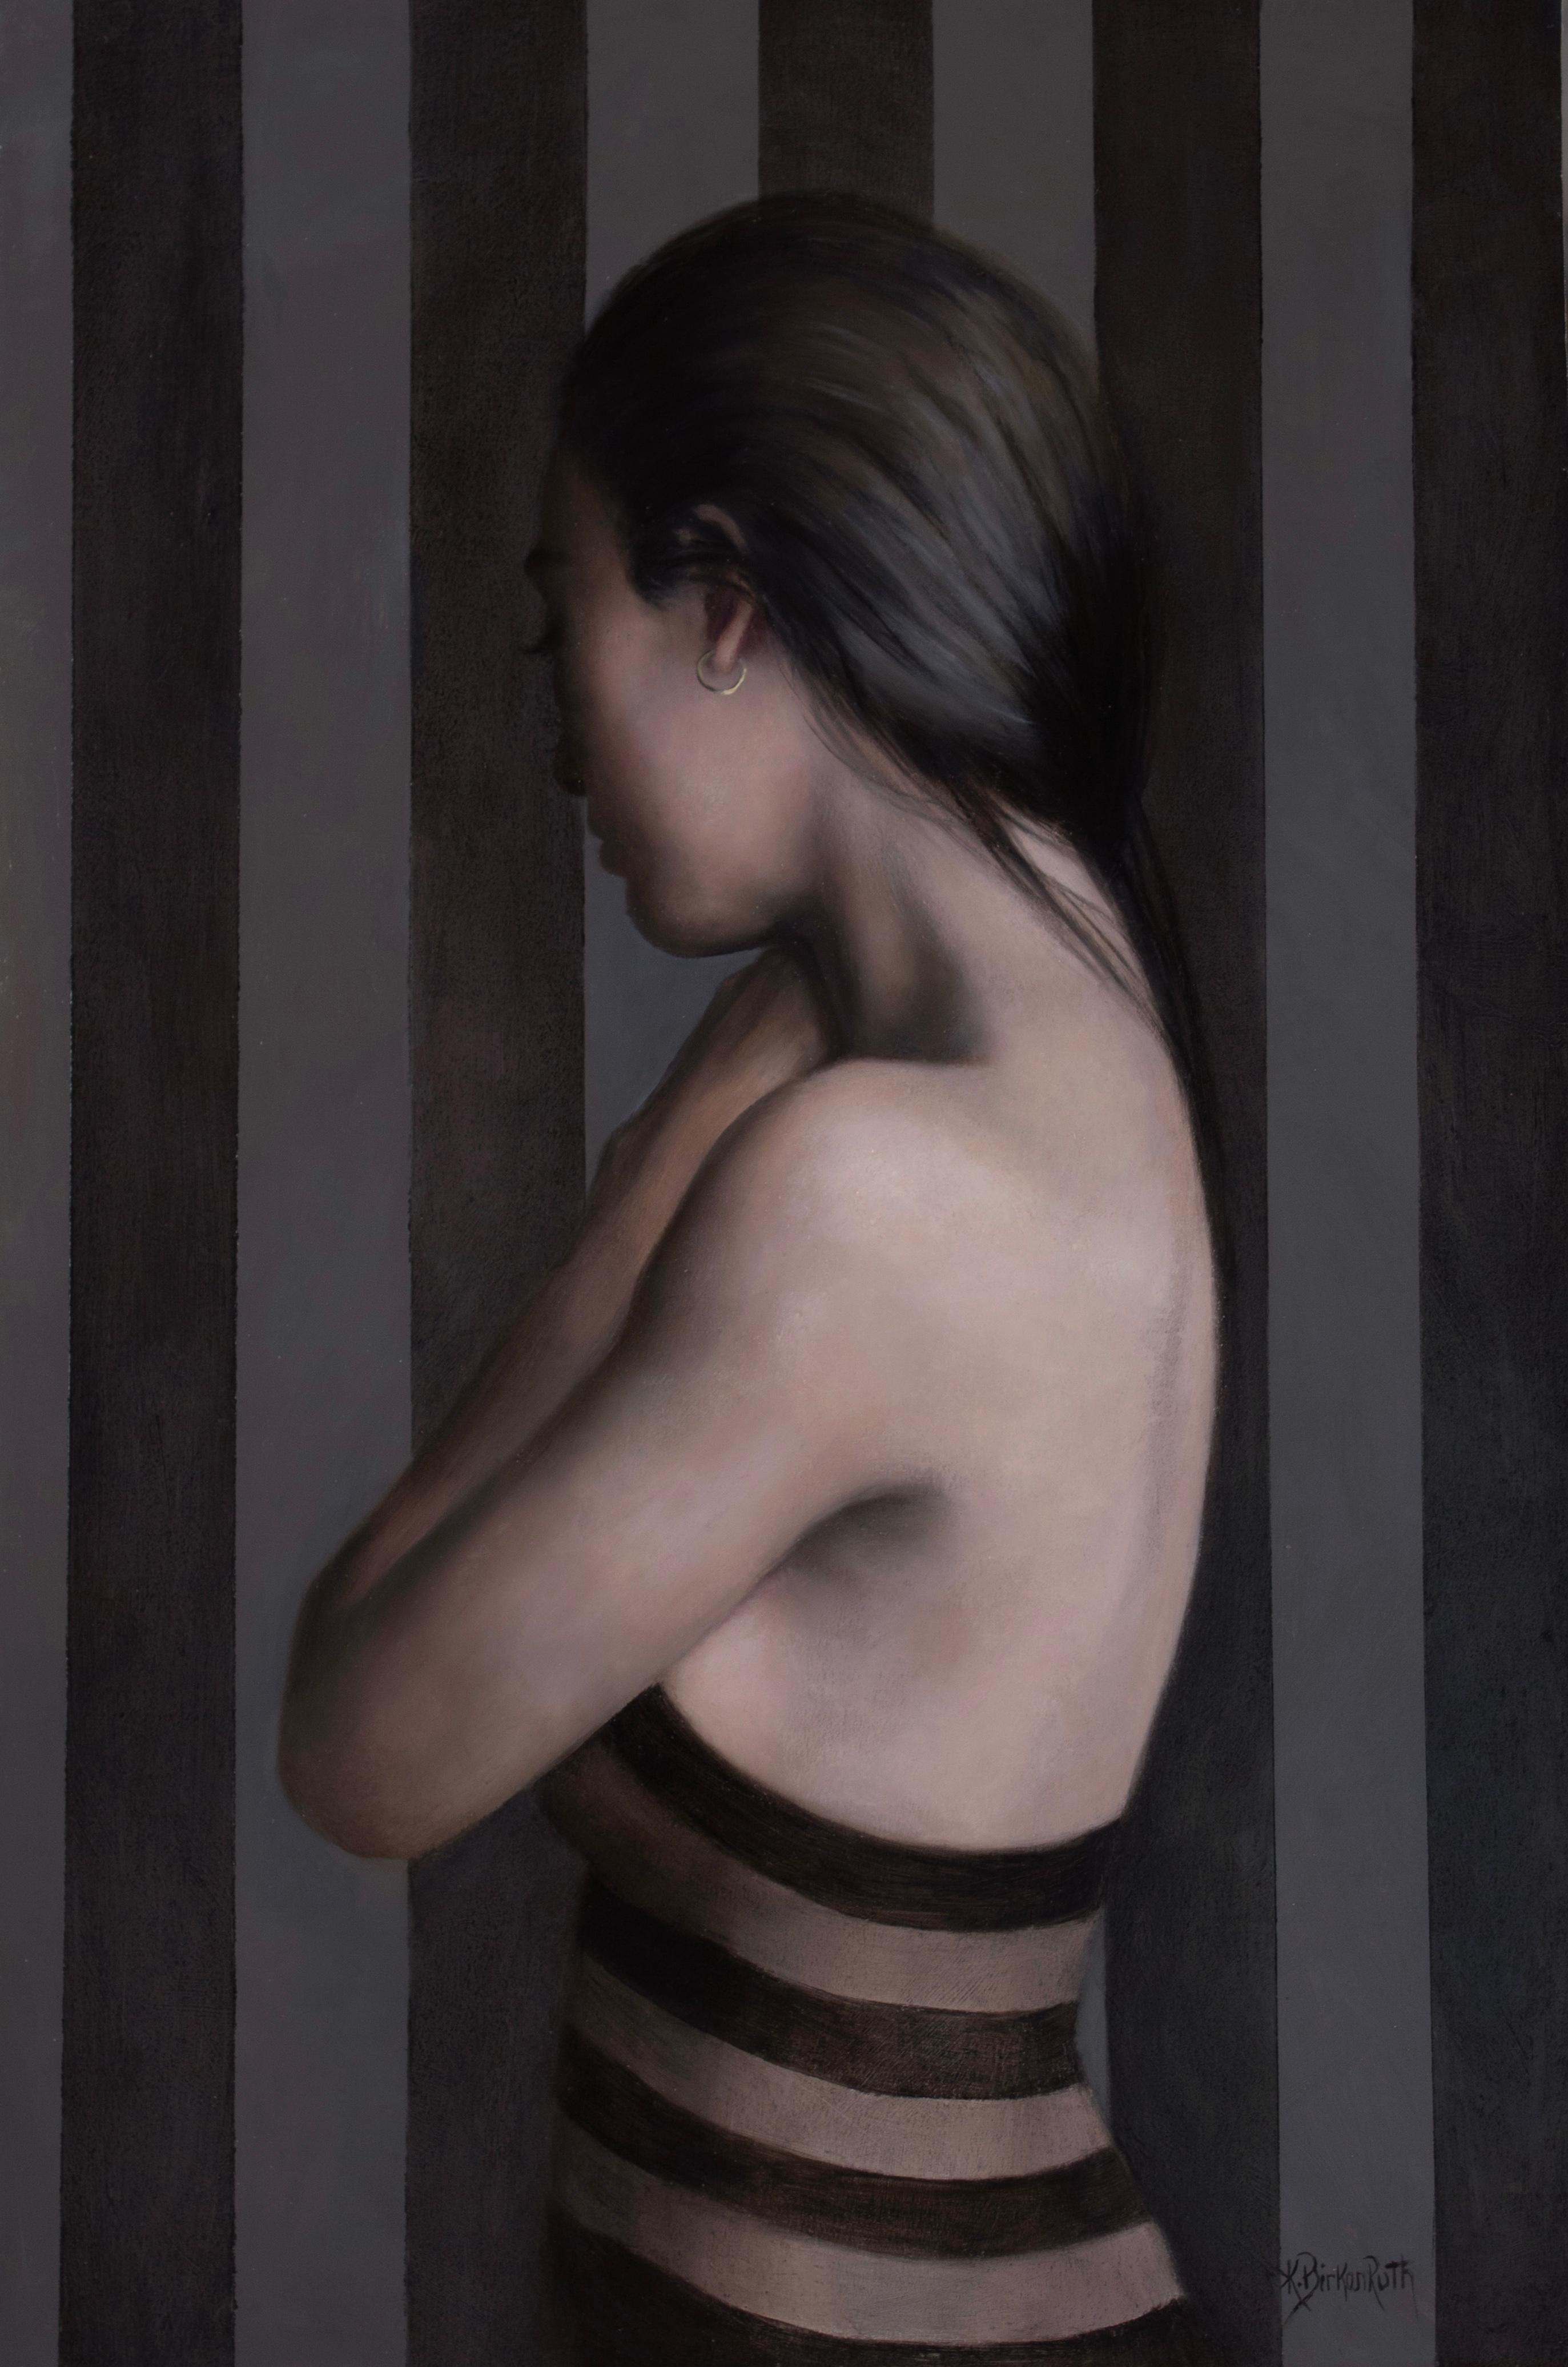 Kelly Birkenruth's "Shying Away" (2023) is an evocative original oil painting on panel, measuring 18 x 12 x 2 inches. This captivating artwork features the delicate profile of a young woman in a contemplative pose, set against a background of